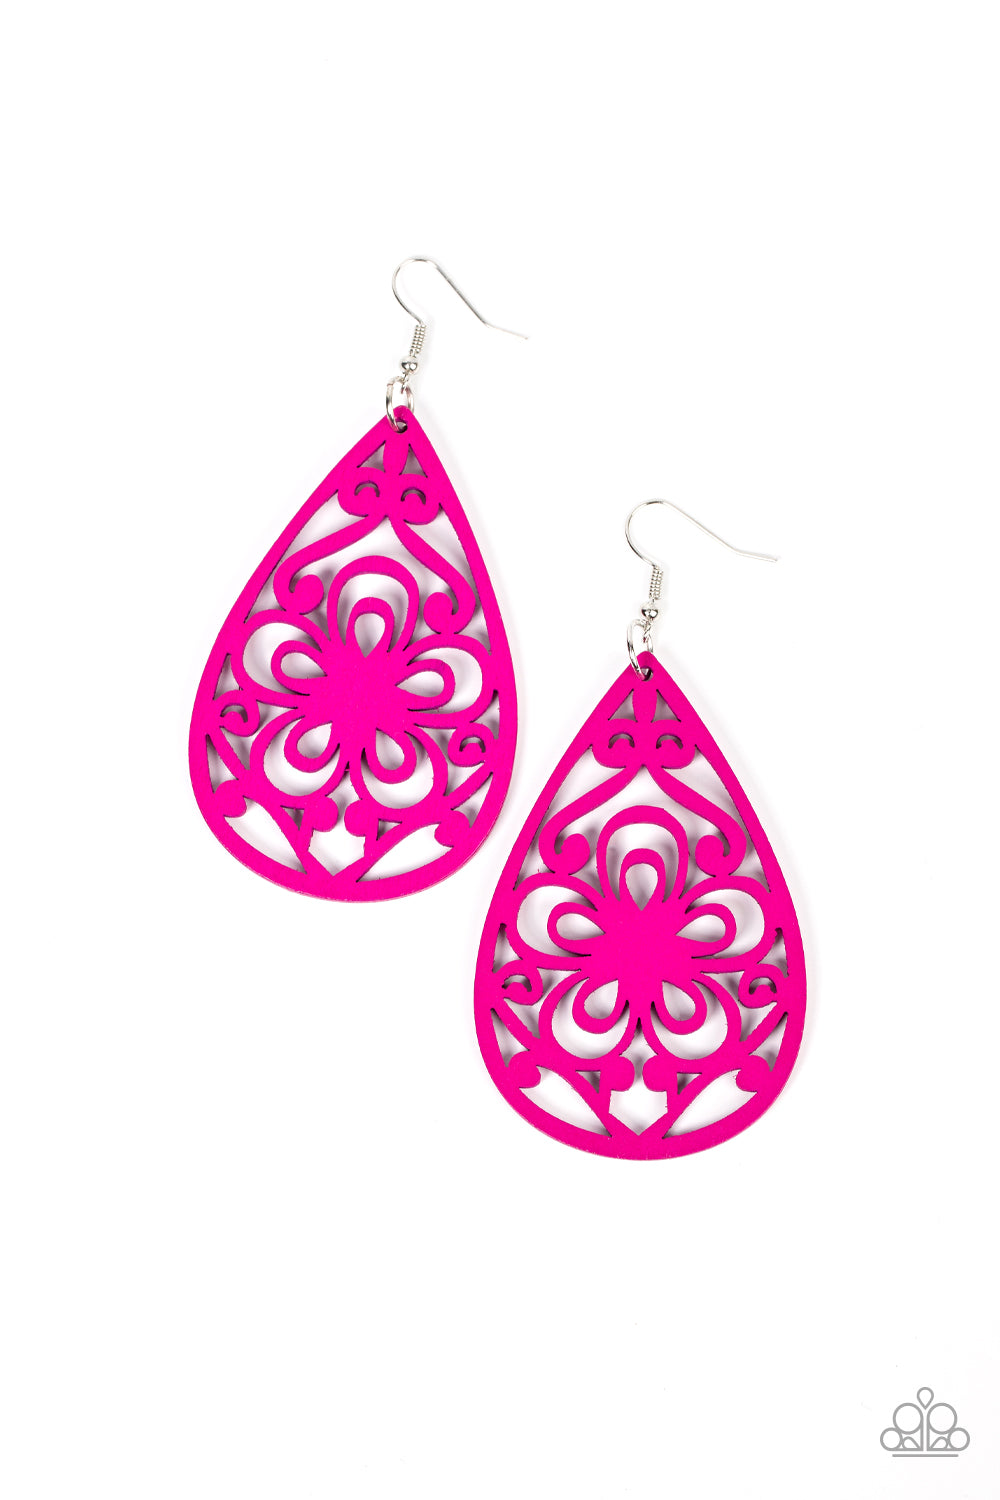 Marine Eden - Pink Wood Earrings - Paparazzi Accessories Bejeweled Accessories By Kristie